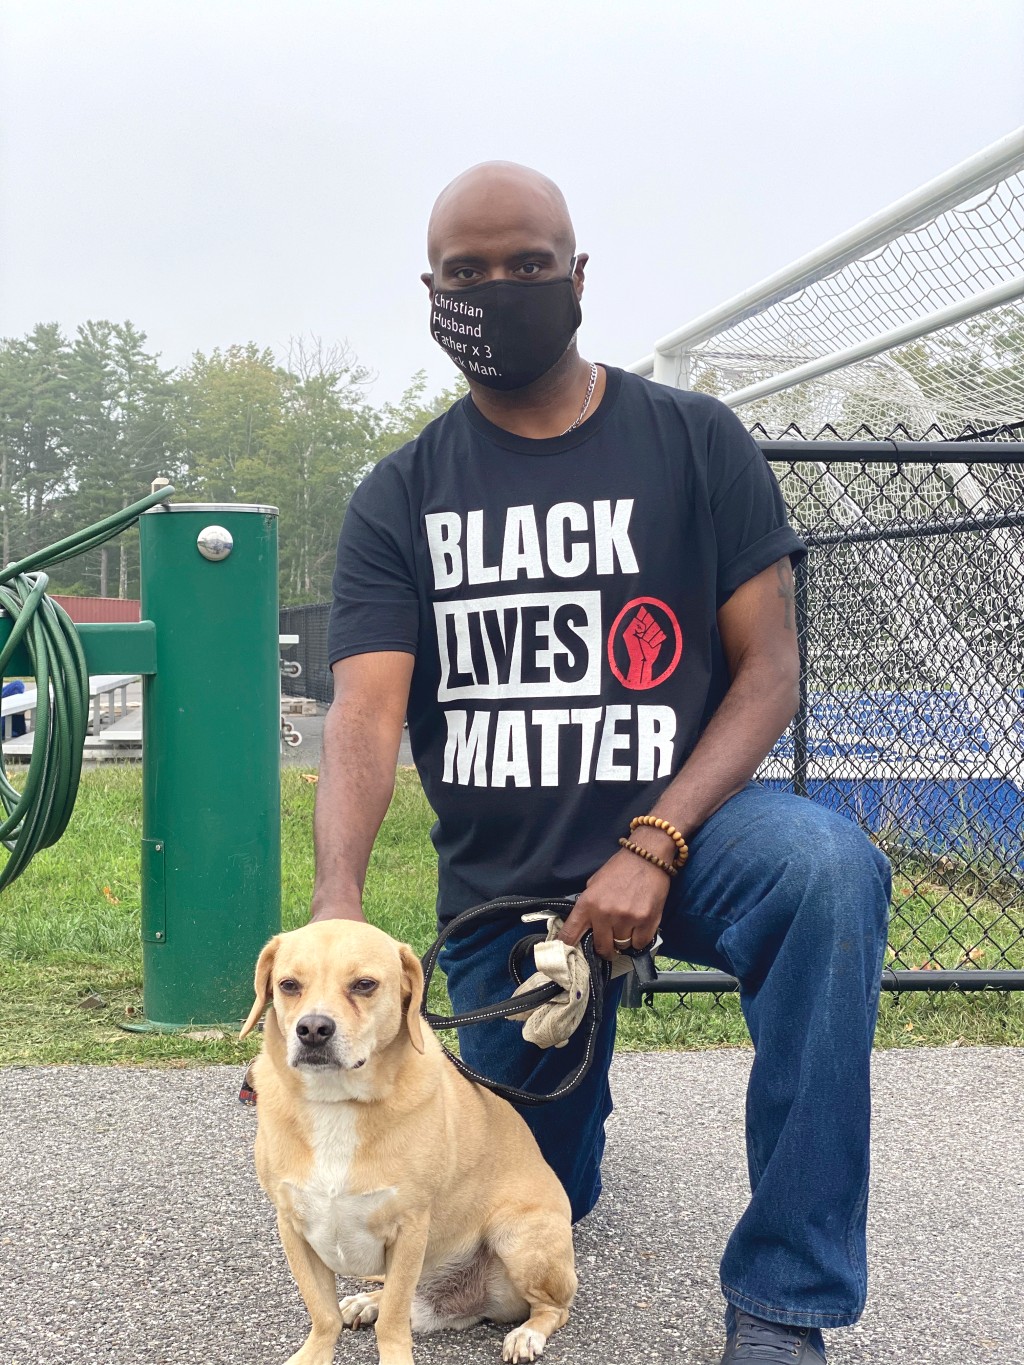 chris hunt wearing a black lives matter t-shirt poses with his dog